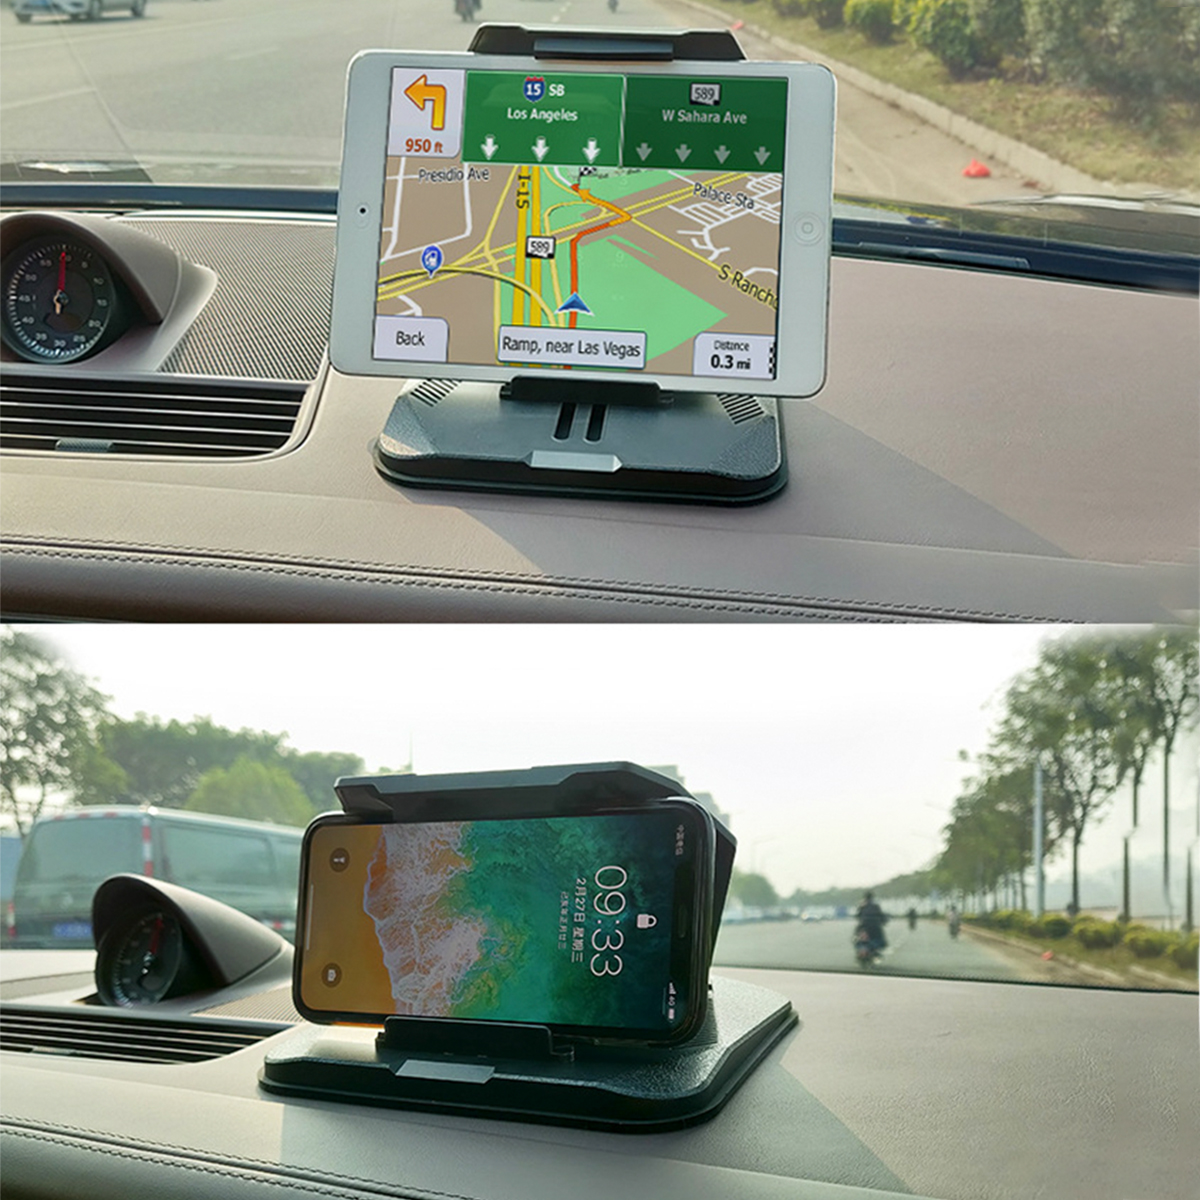 Foldable-Multifunctional-Car-Dashboard-Mount-Mobile-Phone-GPS-Holder-Stand-for-30-97-inch-Devices-1791089-12